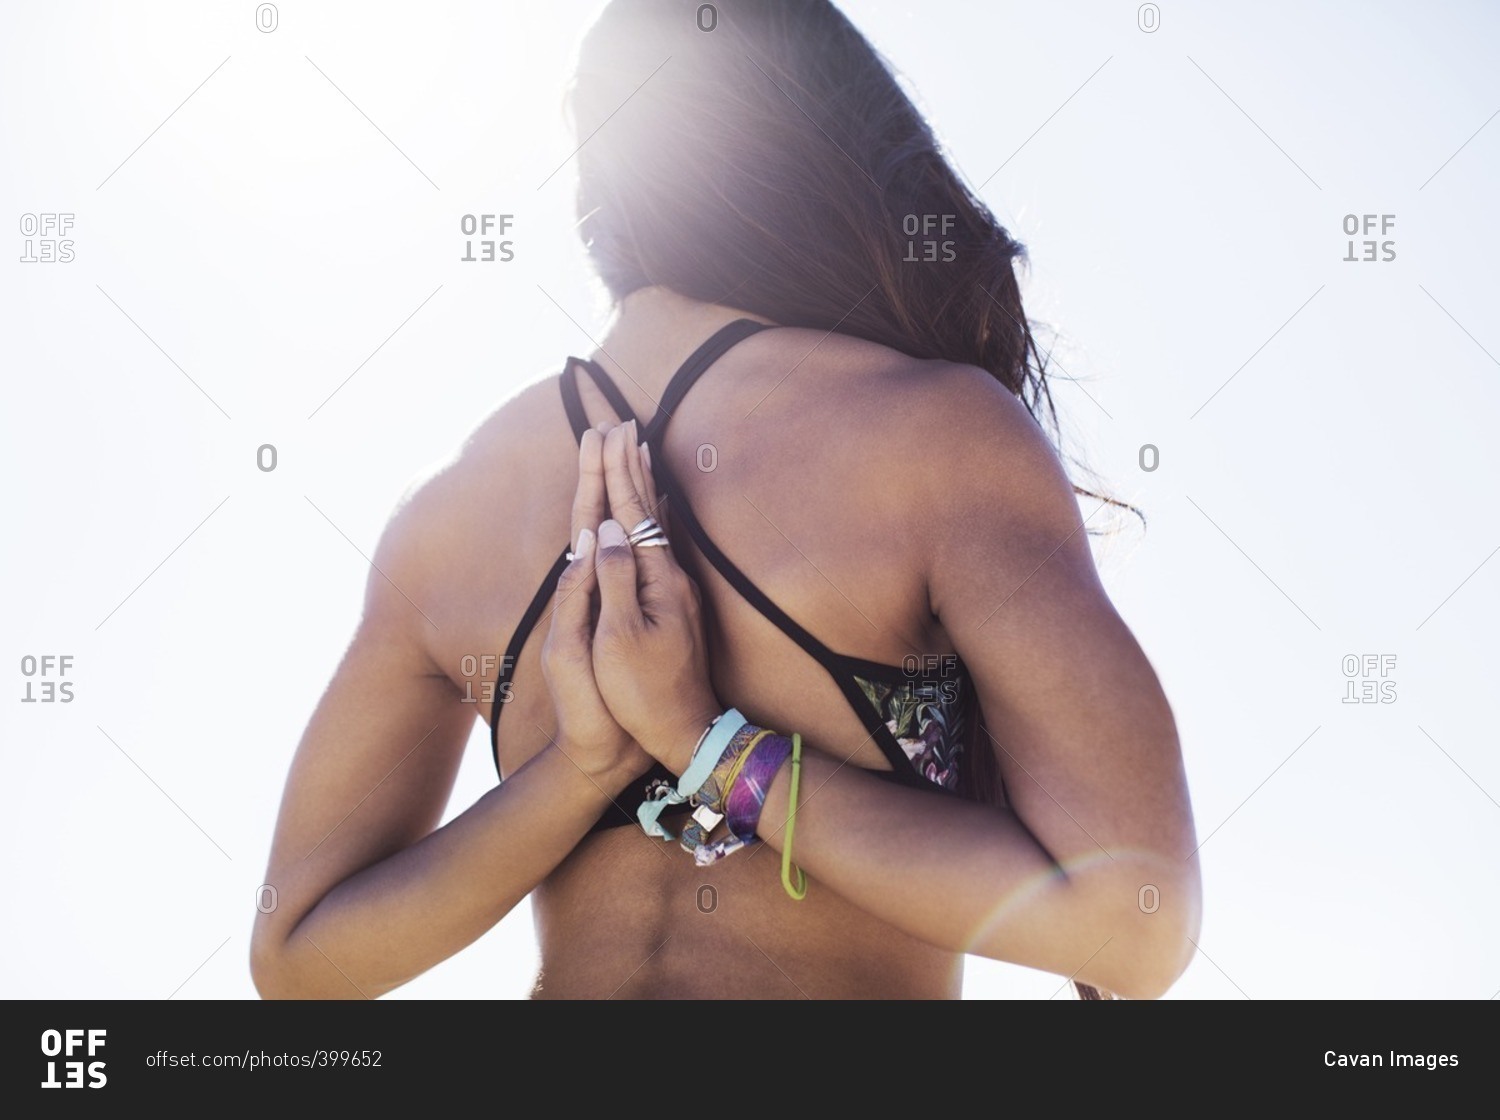 Rear view of young woman doing reverse prayer pose against clear sky on sunny day